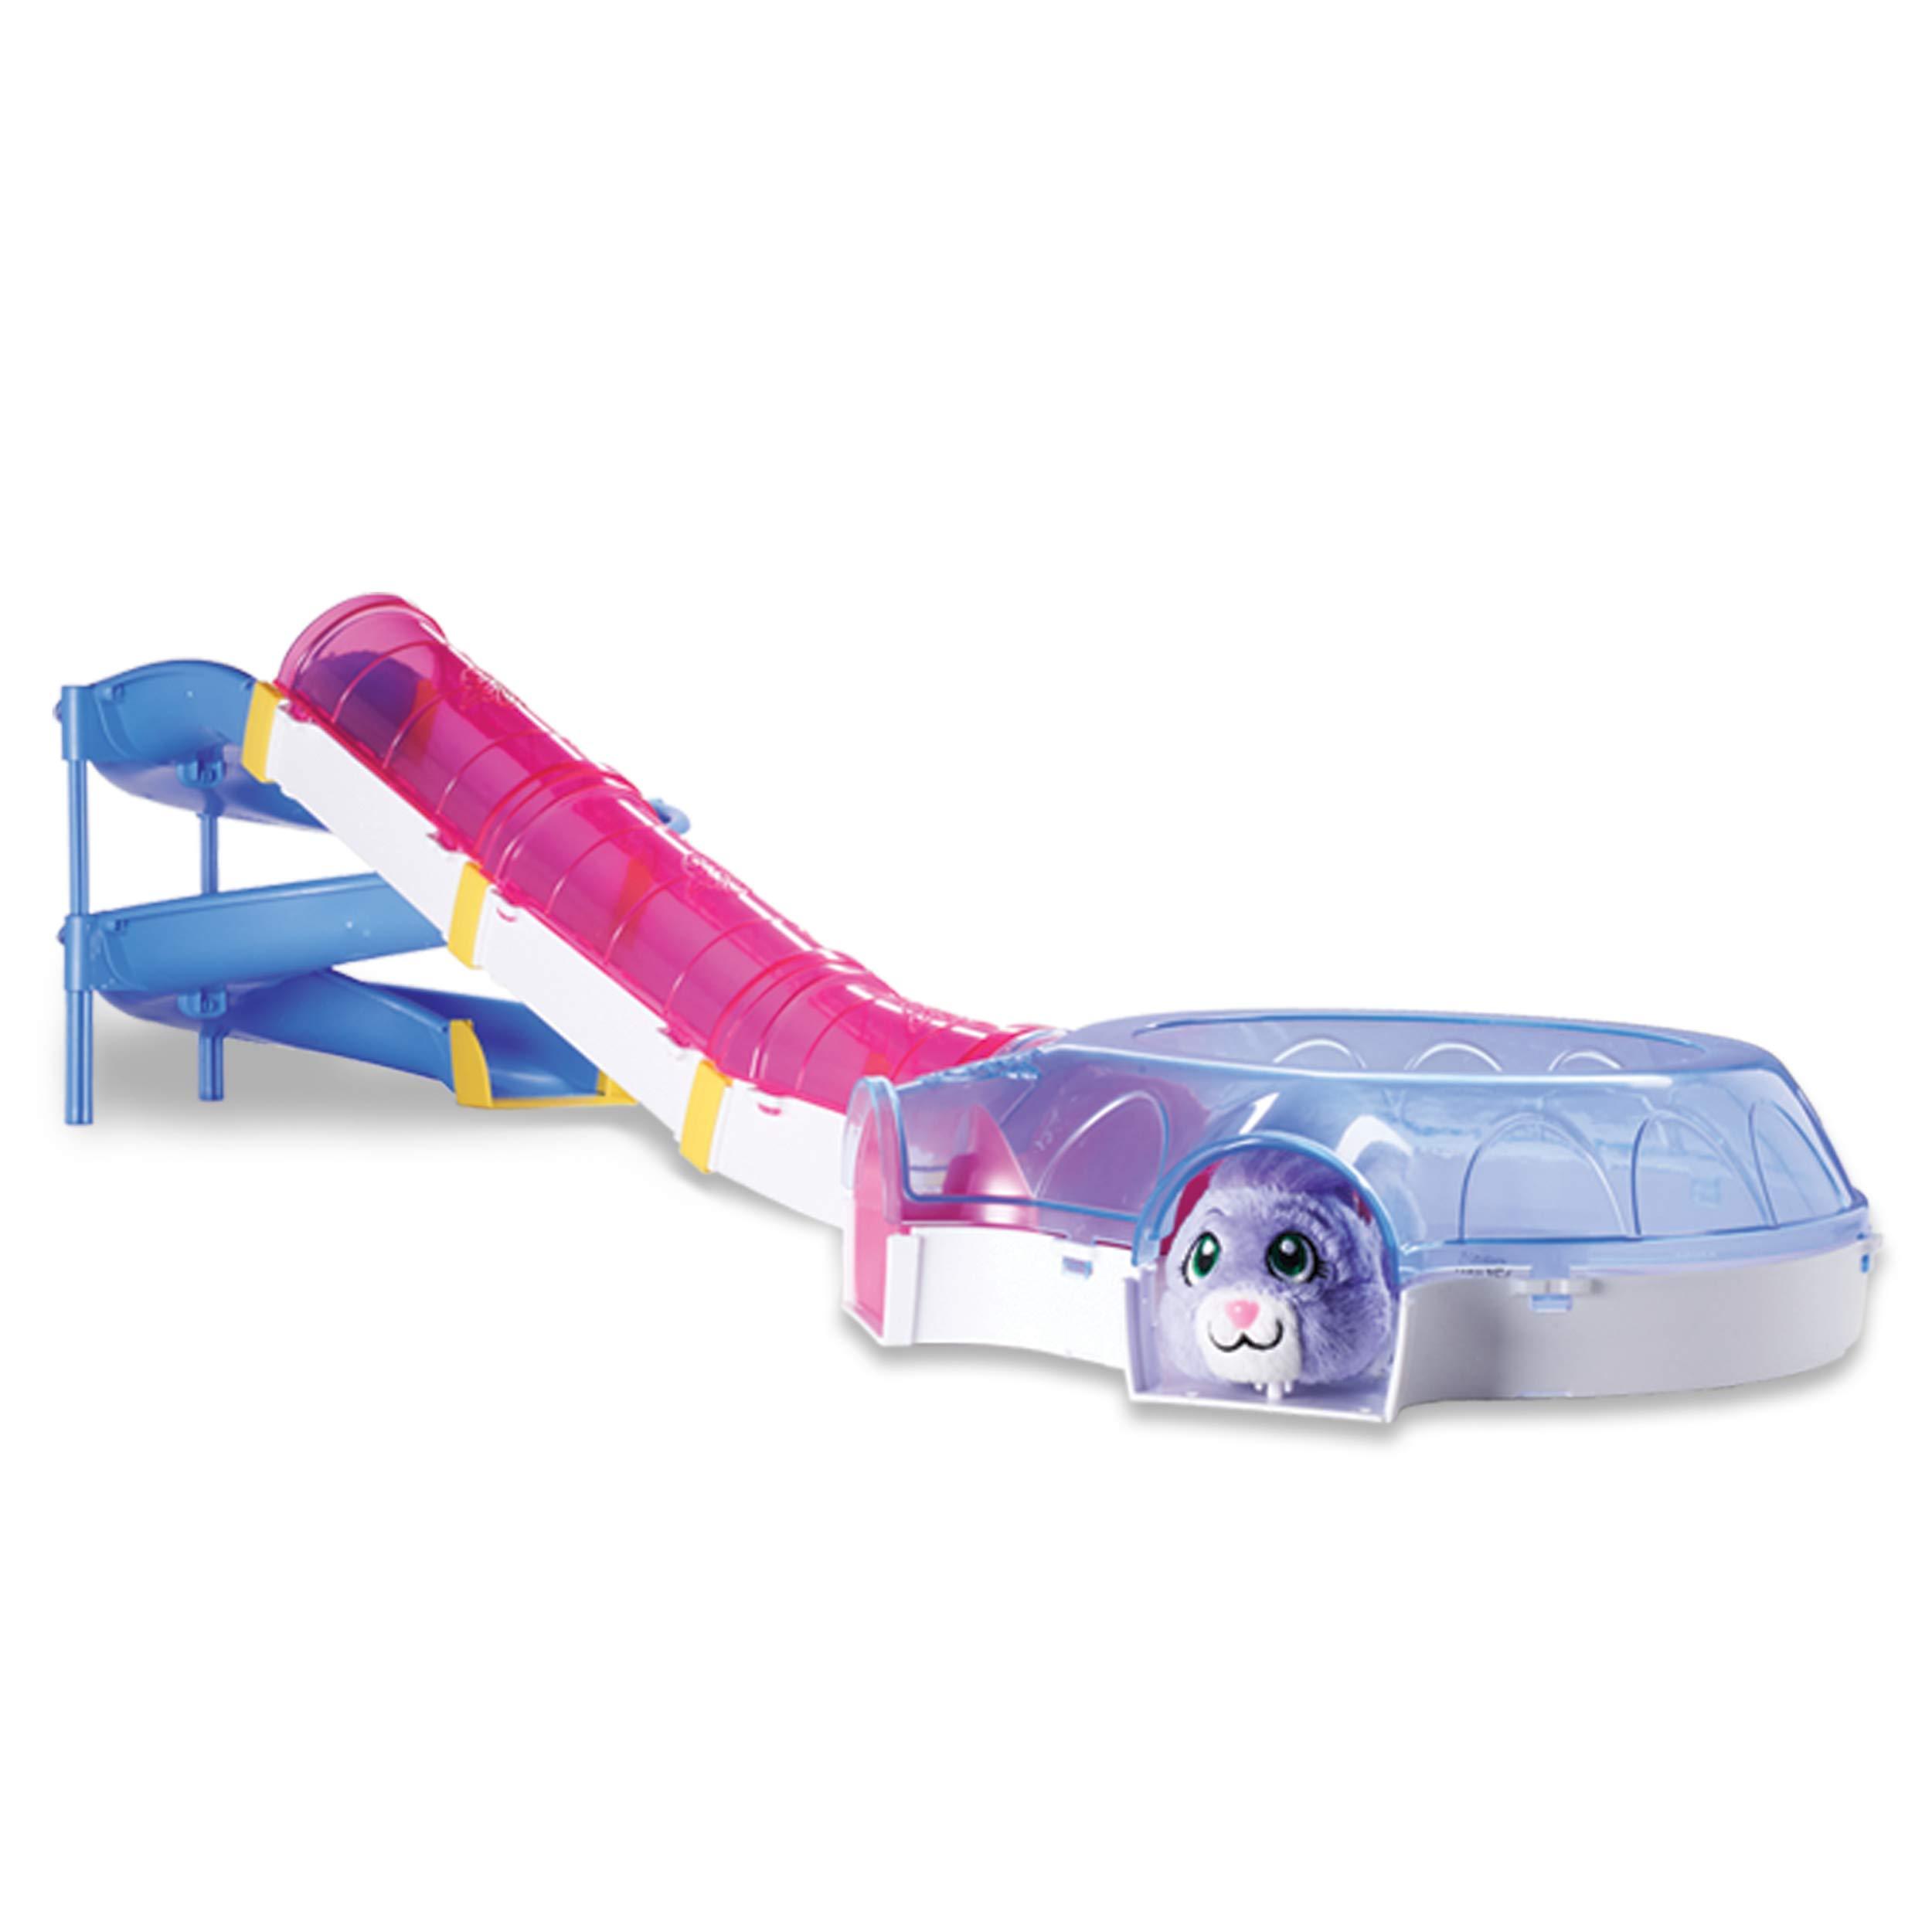 Zhu Zhu Pets – Hamster House Play Set with Slide and Tunnel - image 5 of 8